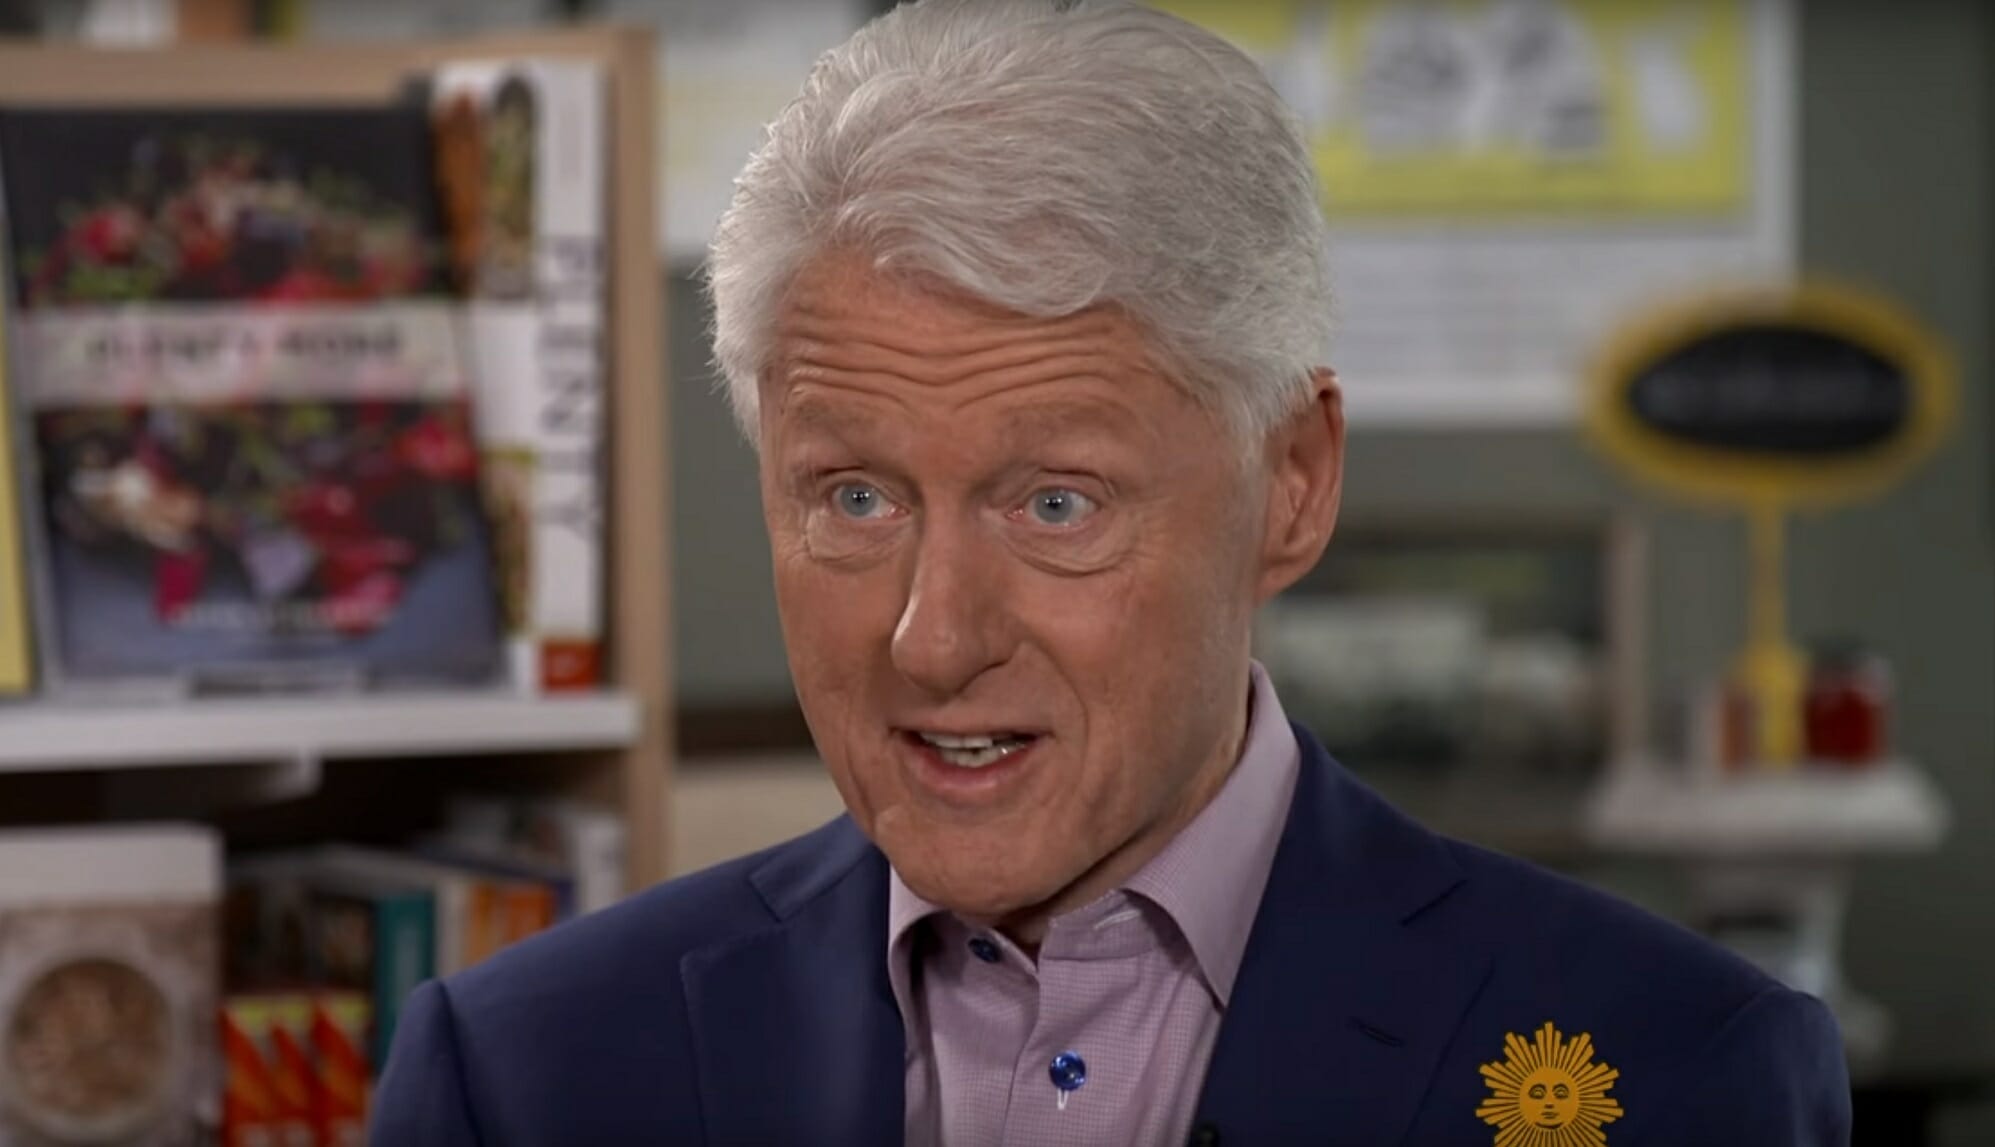  BREAKING: Bill Clinton Hospitalized with an Infection